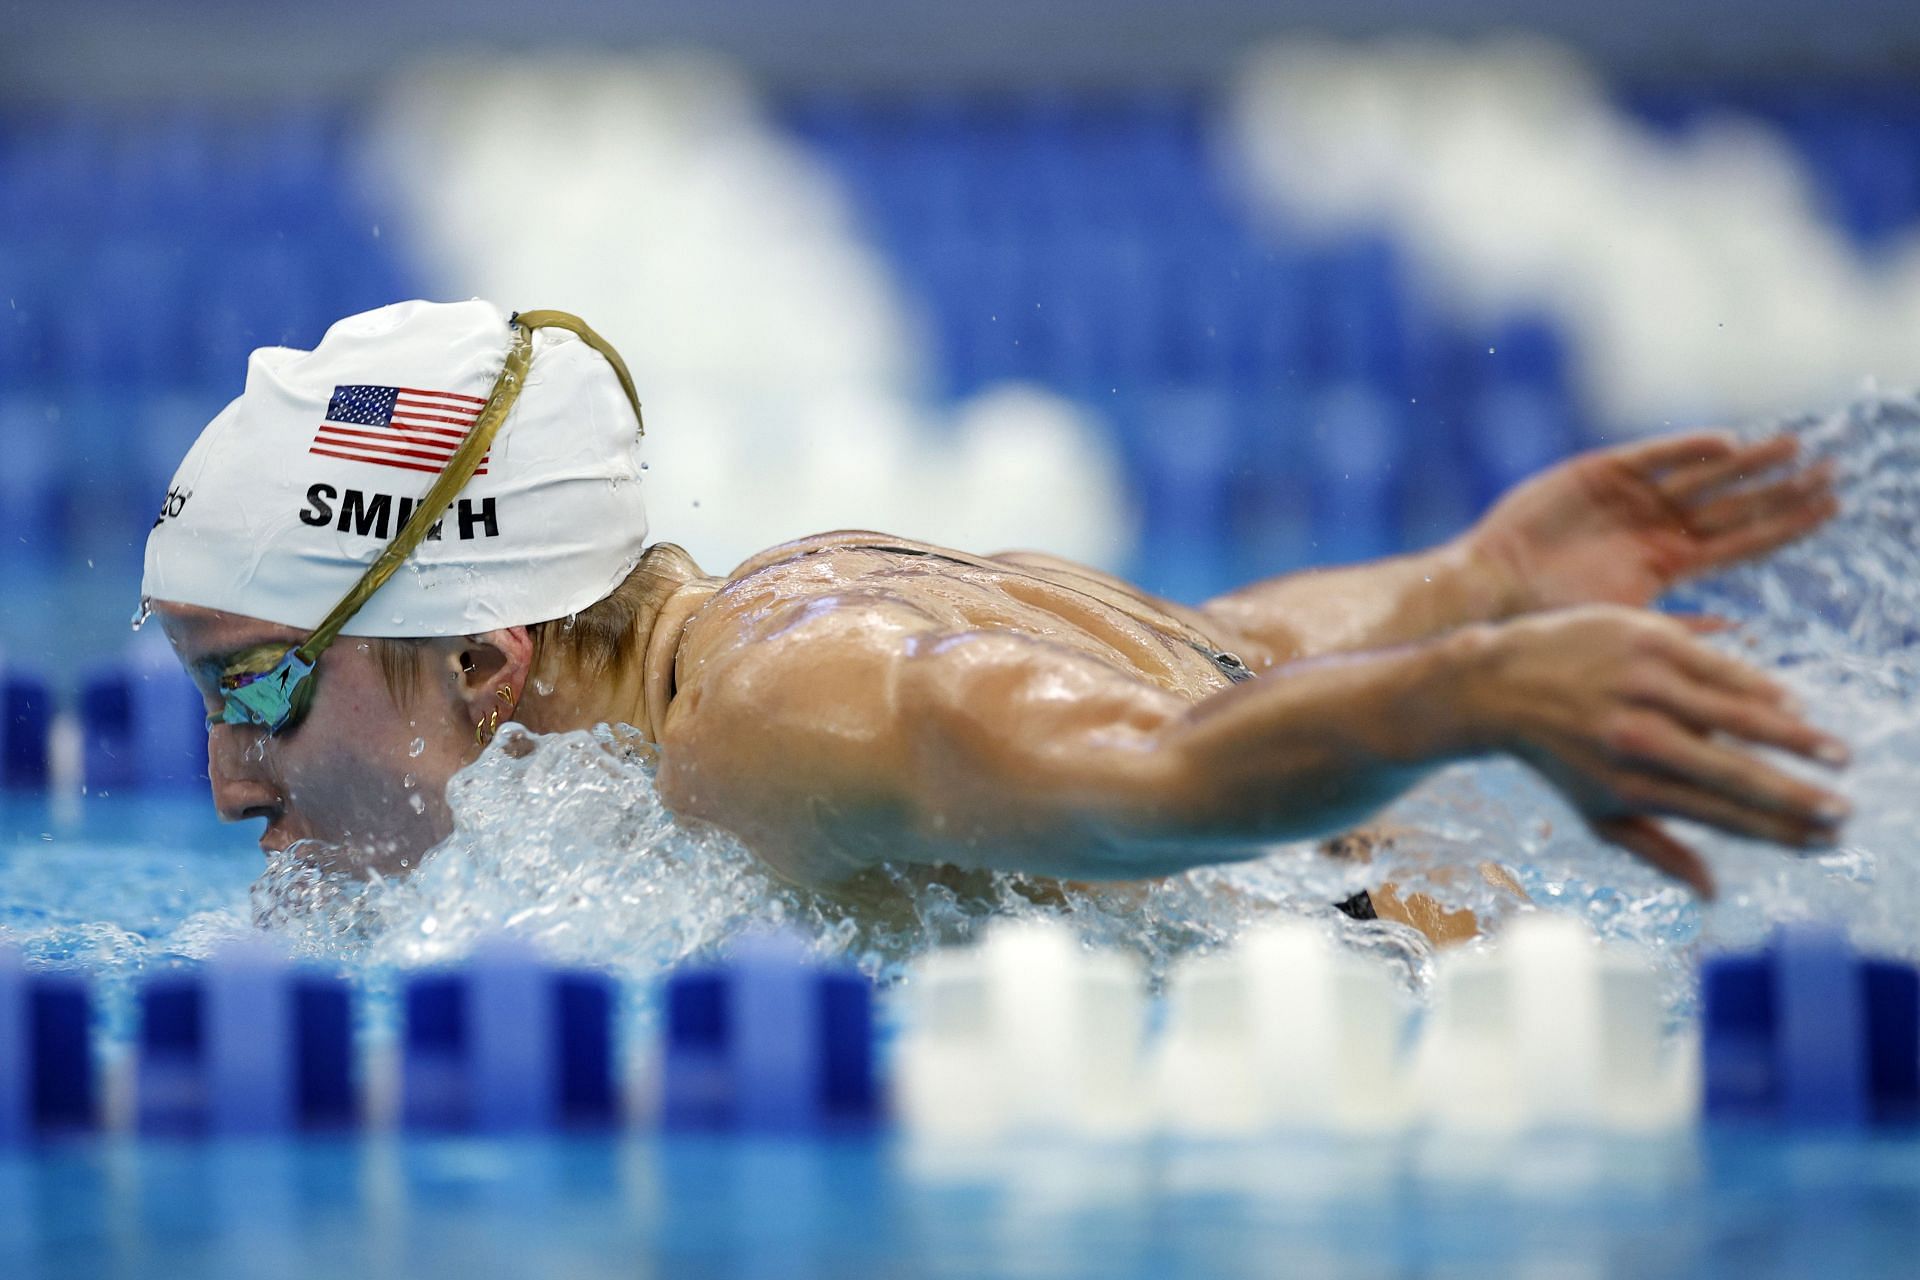 Regan Smith competes in the Women&#039;s 200m Butterfly Final during the Toyota U.S. Open Championships at Greensboro Aquatic Center on December 03, 2022 in Greensboro, North Carolina. (Photo by Jared C. Tilton/Getty Images)